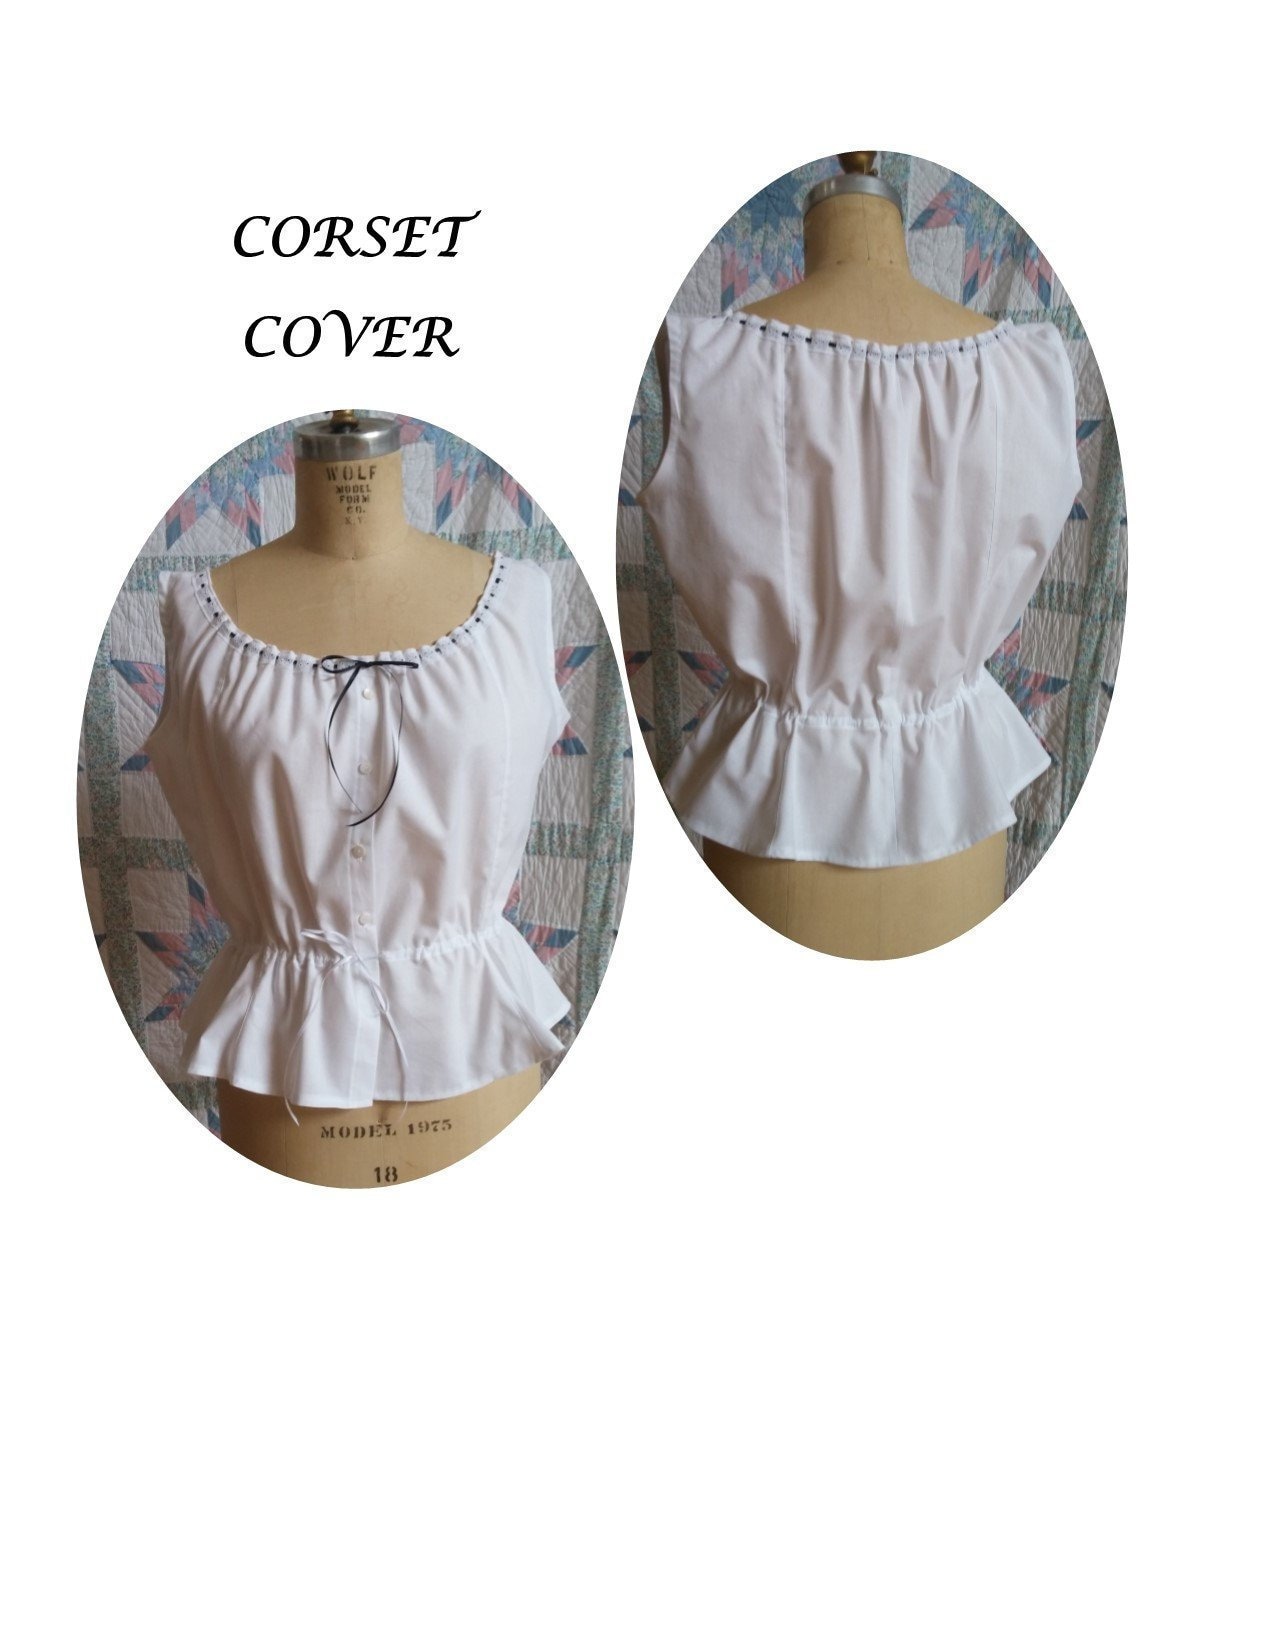 Corset Cover/ Camisole / 19th Century Underpinning Regular and Plus Sizes 